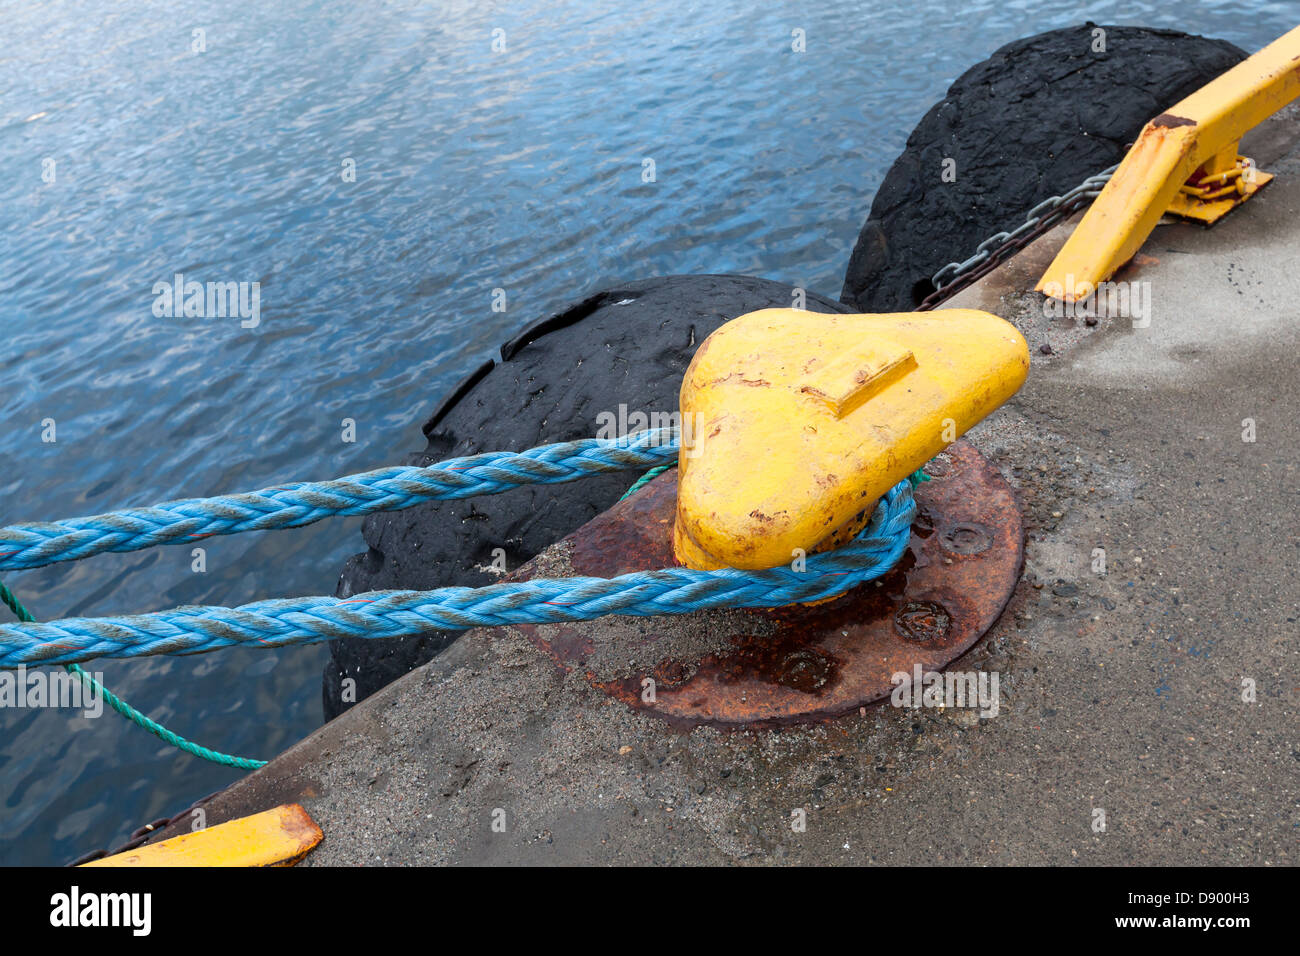 Yellow mooring bollard with blue naval rope on the pier Stock Photo